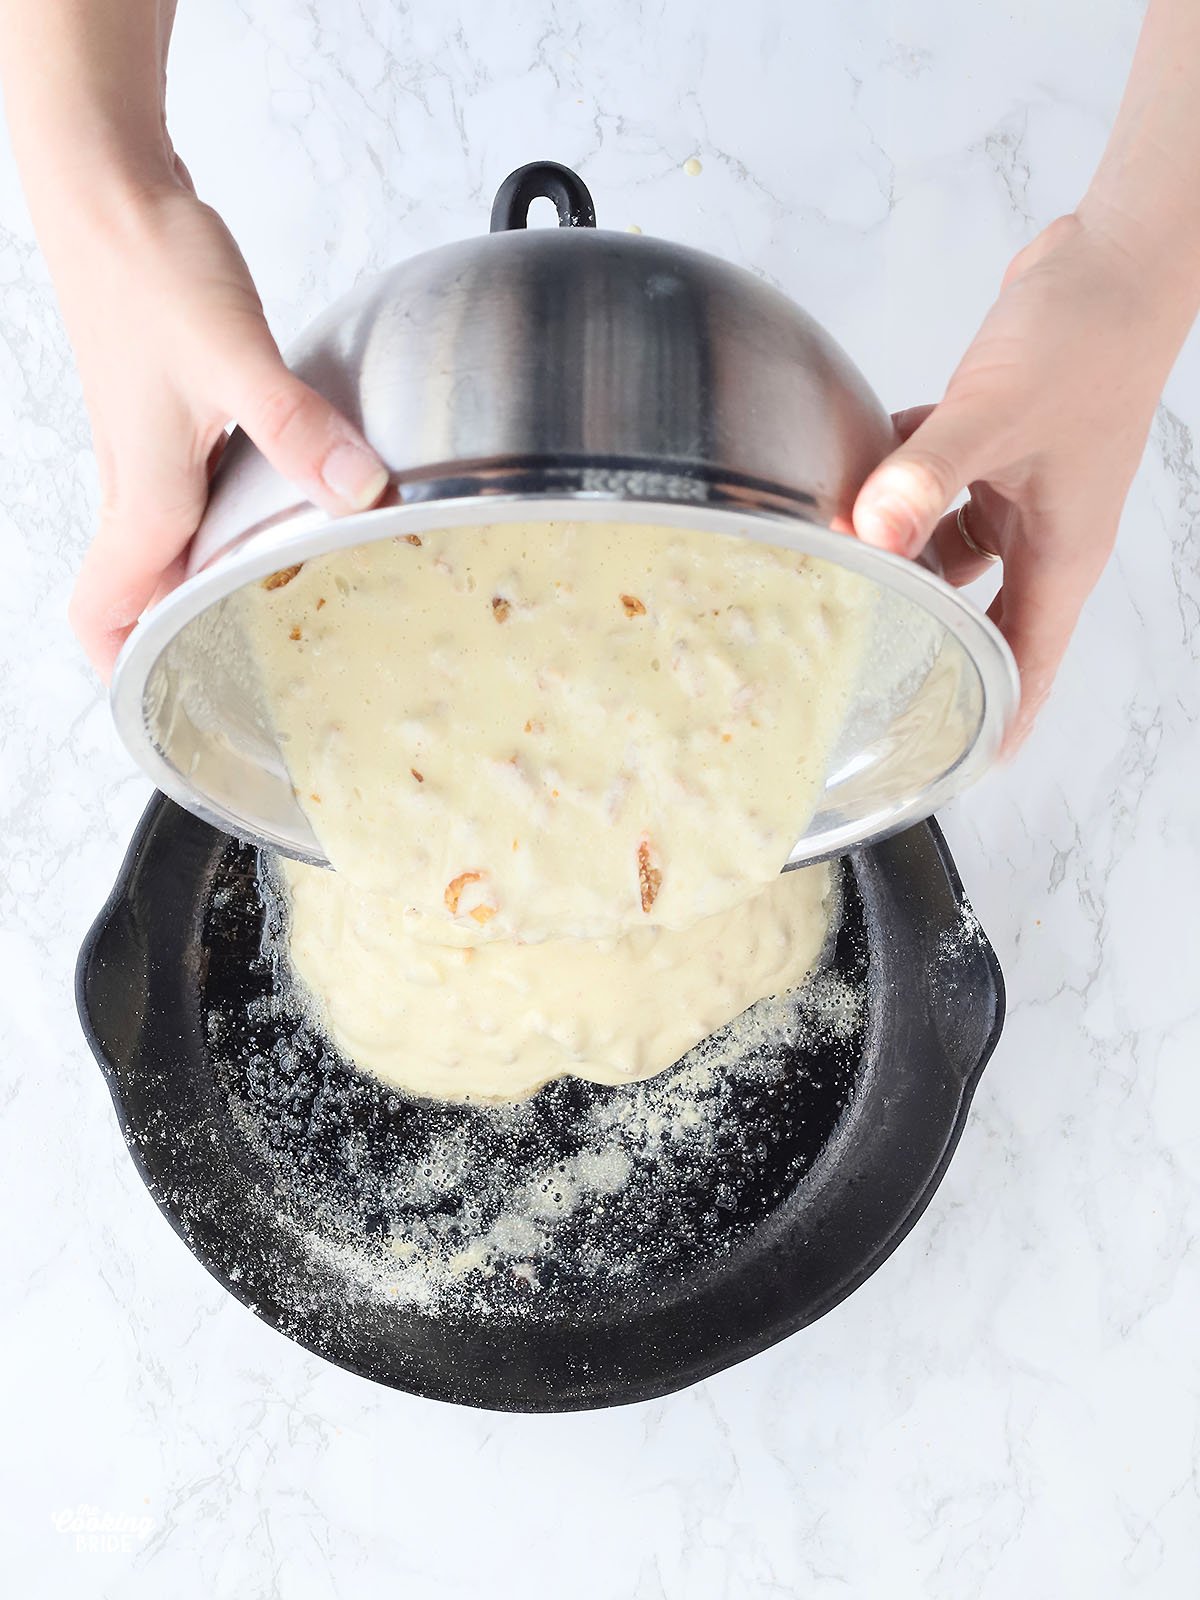 hands pouring cracklin' corn bread batter into a cast iron skillet